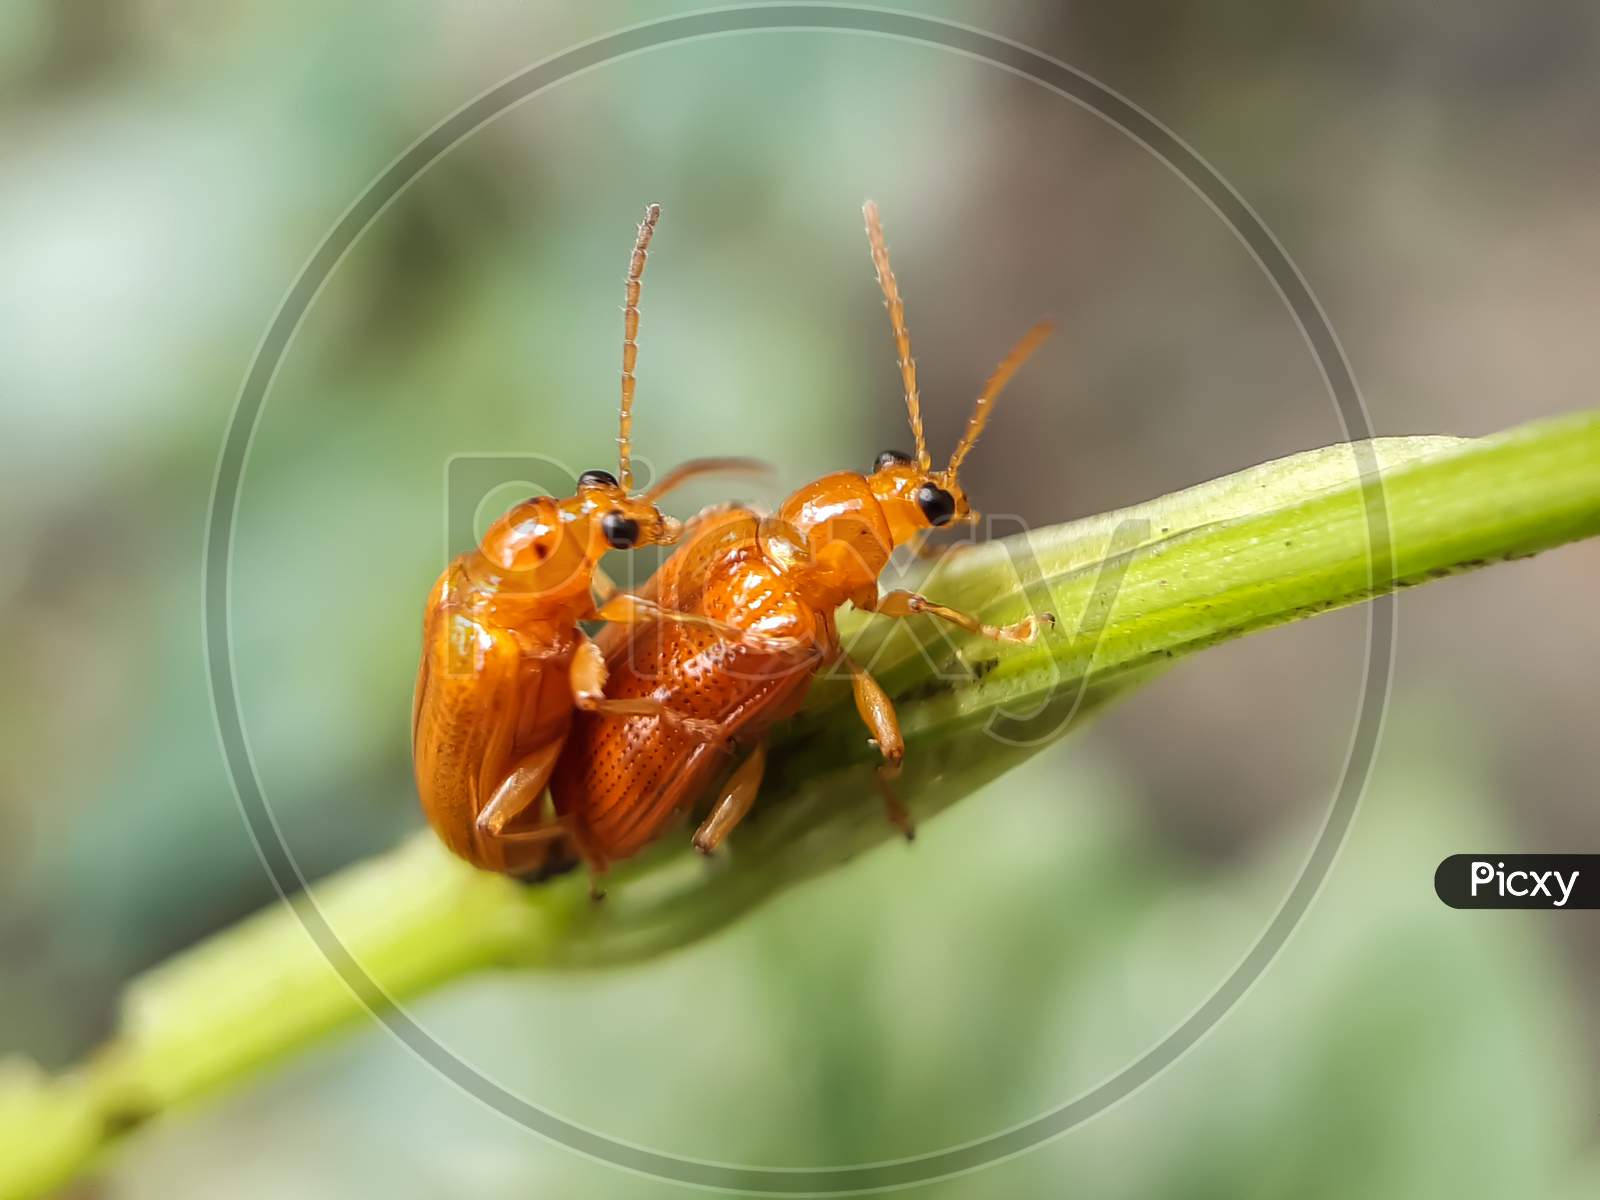 They All Have Sex, No Matter How Small The Animals In The World, And Here And There Two Yellow Insects Are Having Sex.